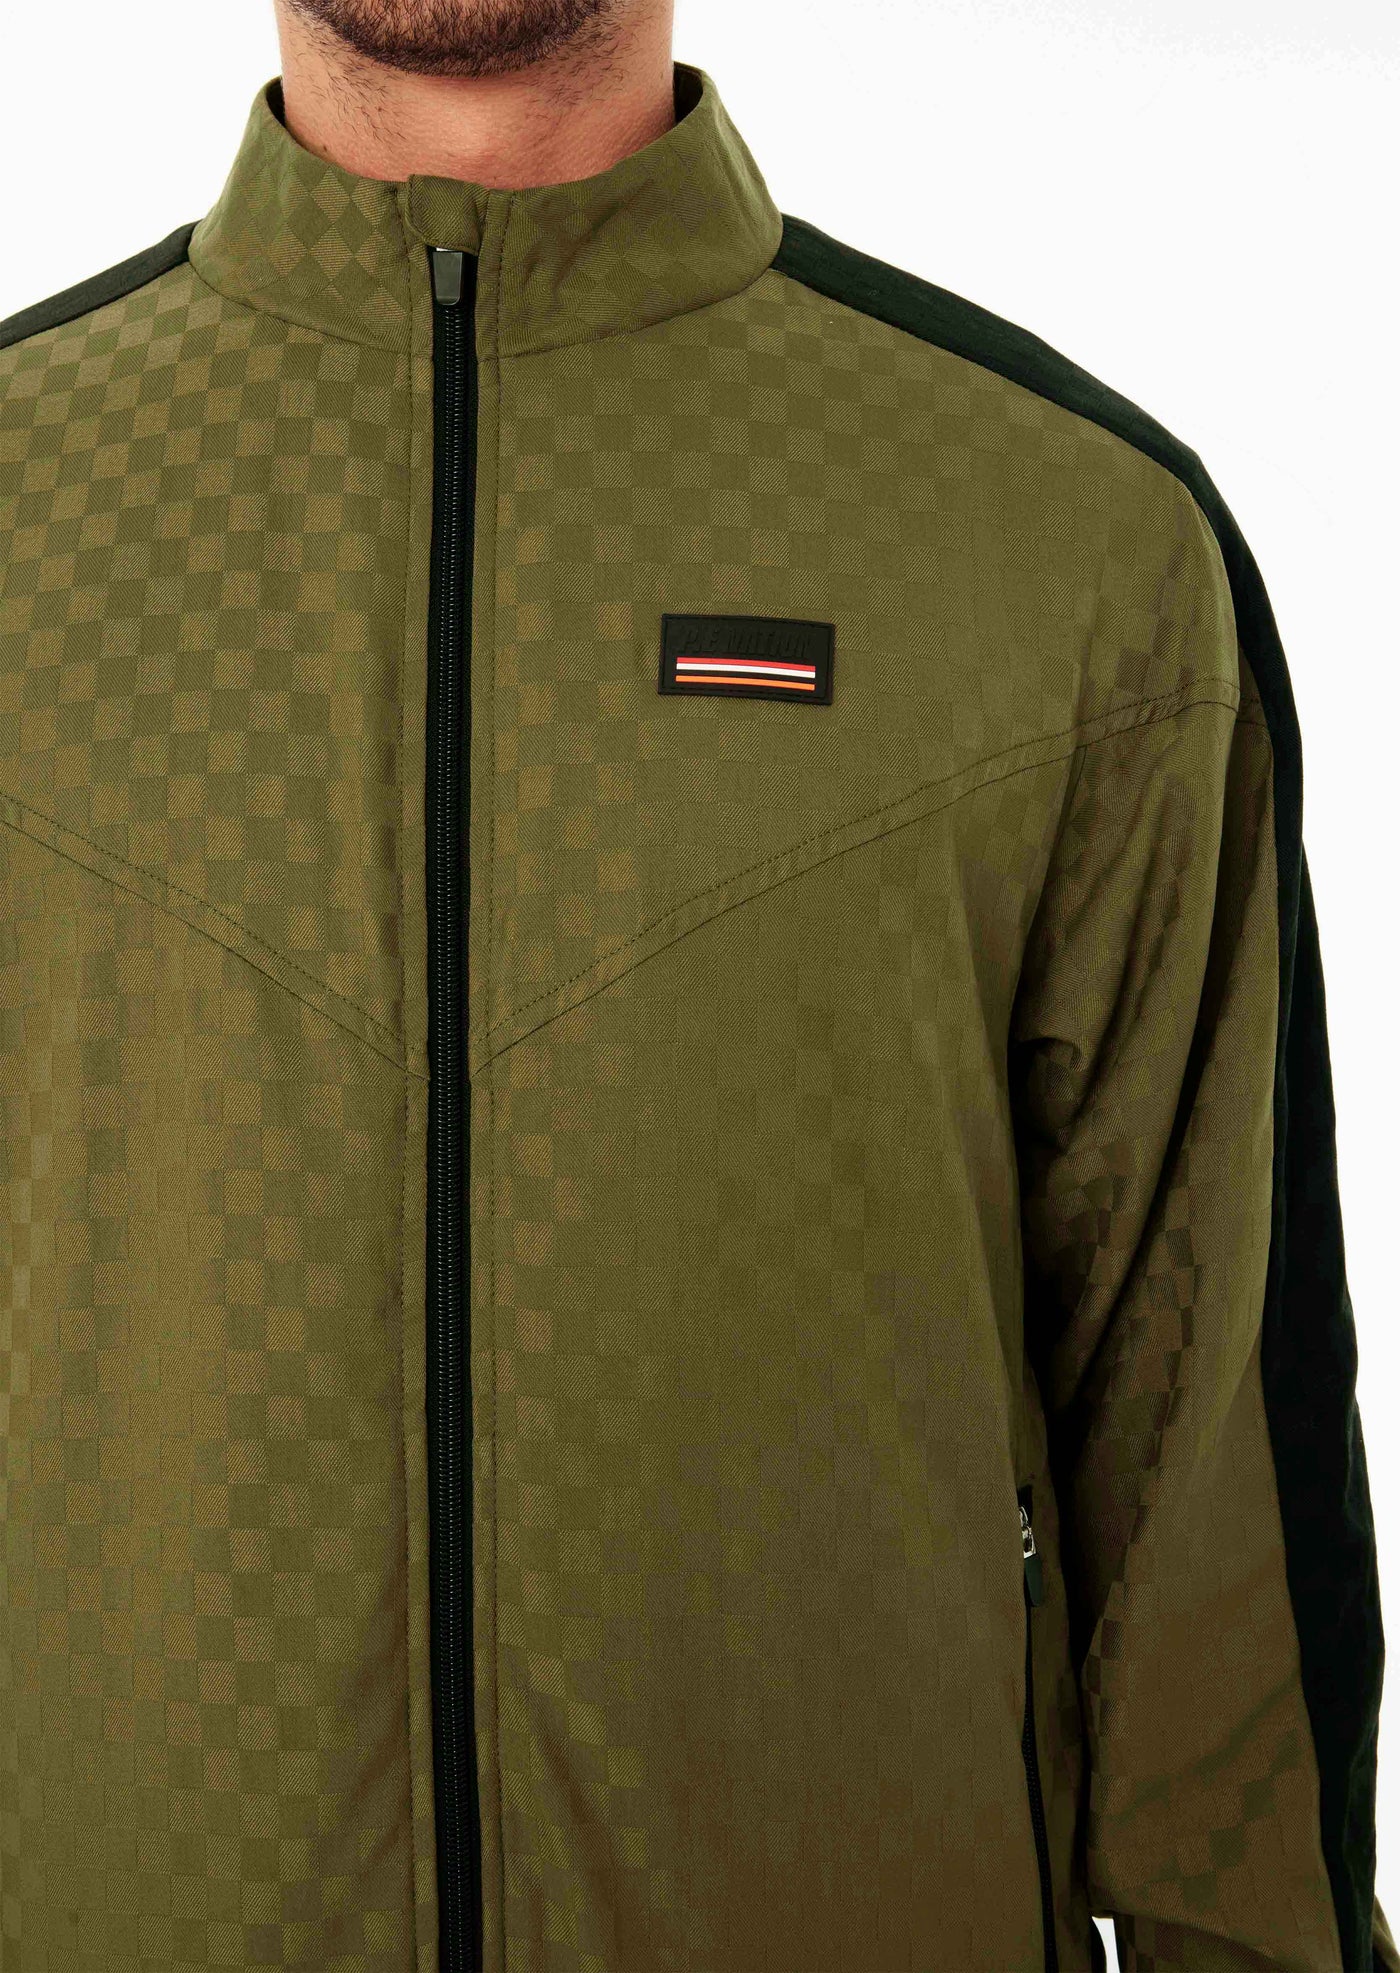 WEST DIVISION JACKET IN KHAKI